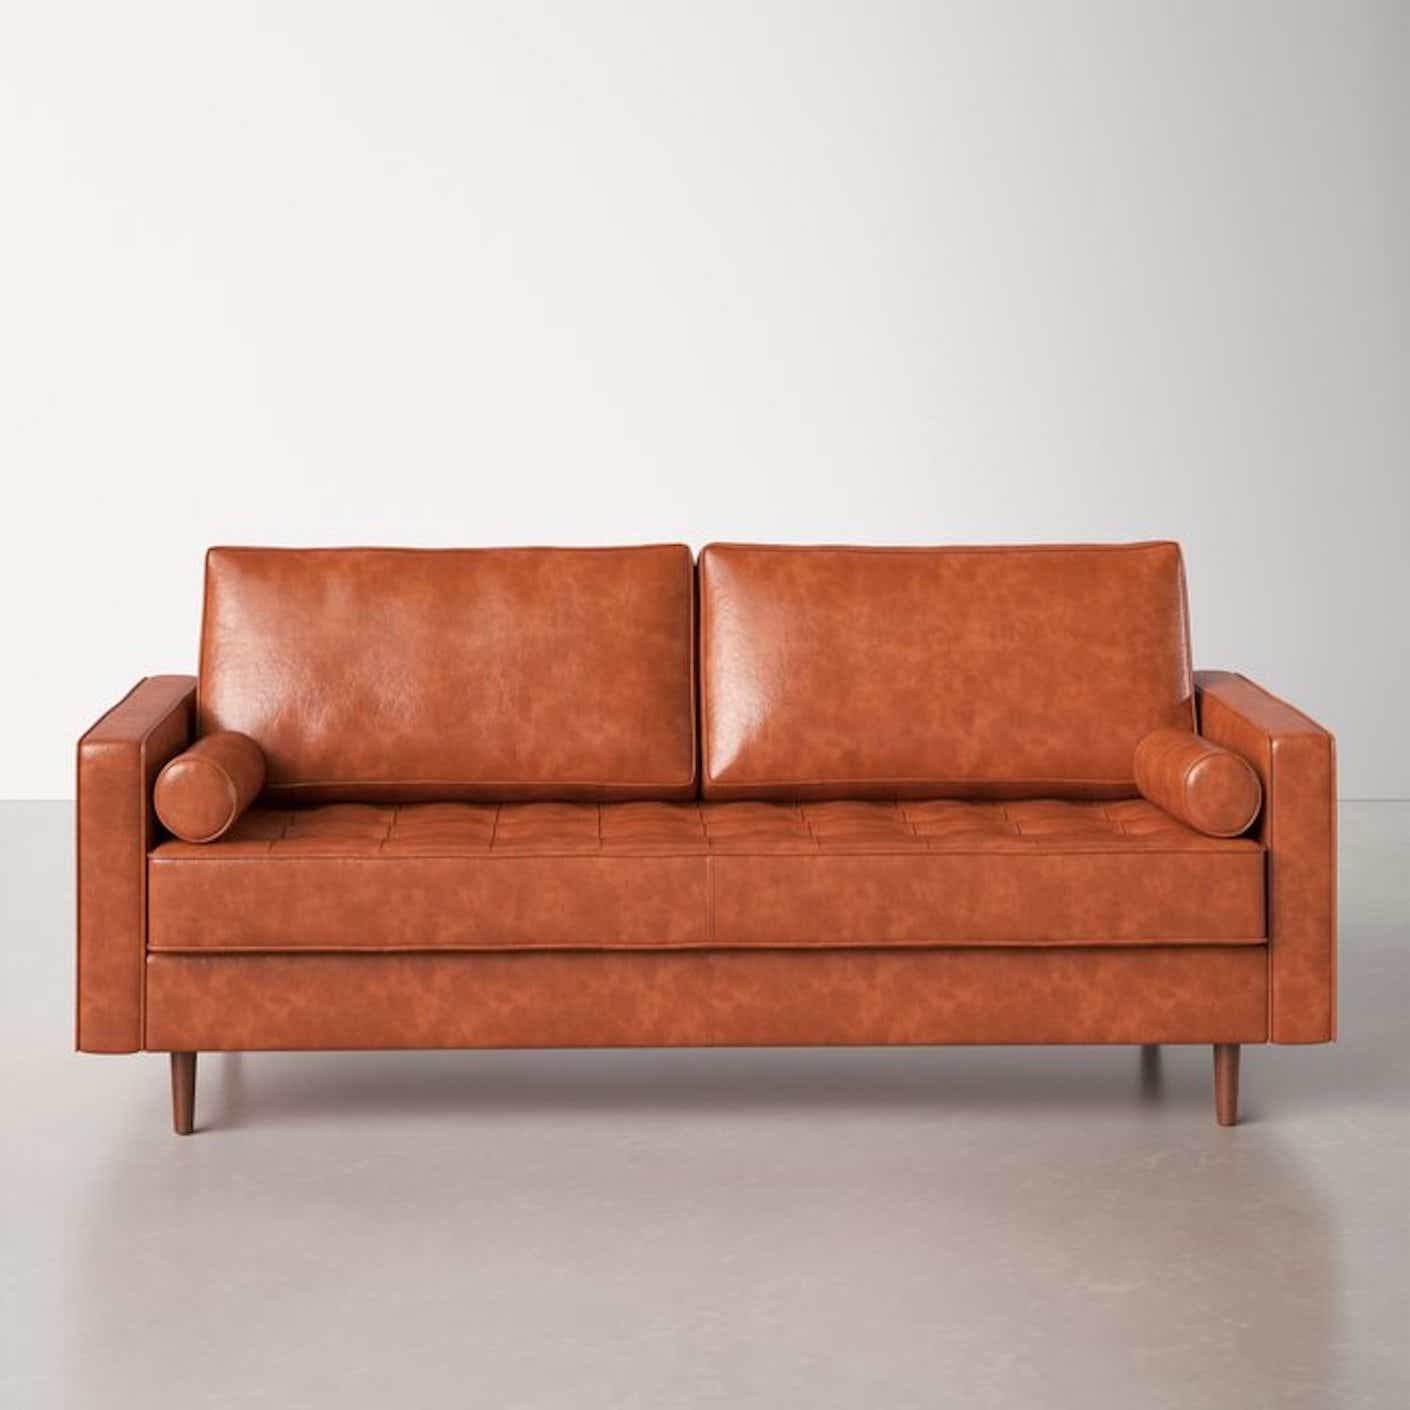 A caramel-colored, mid-century modern leather couch is pictured in a stark room.